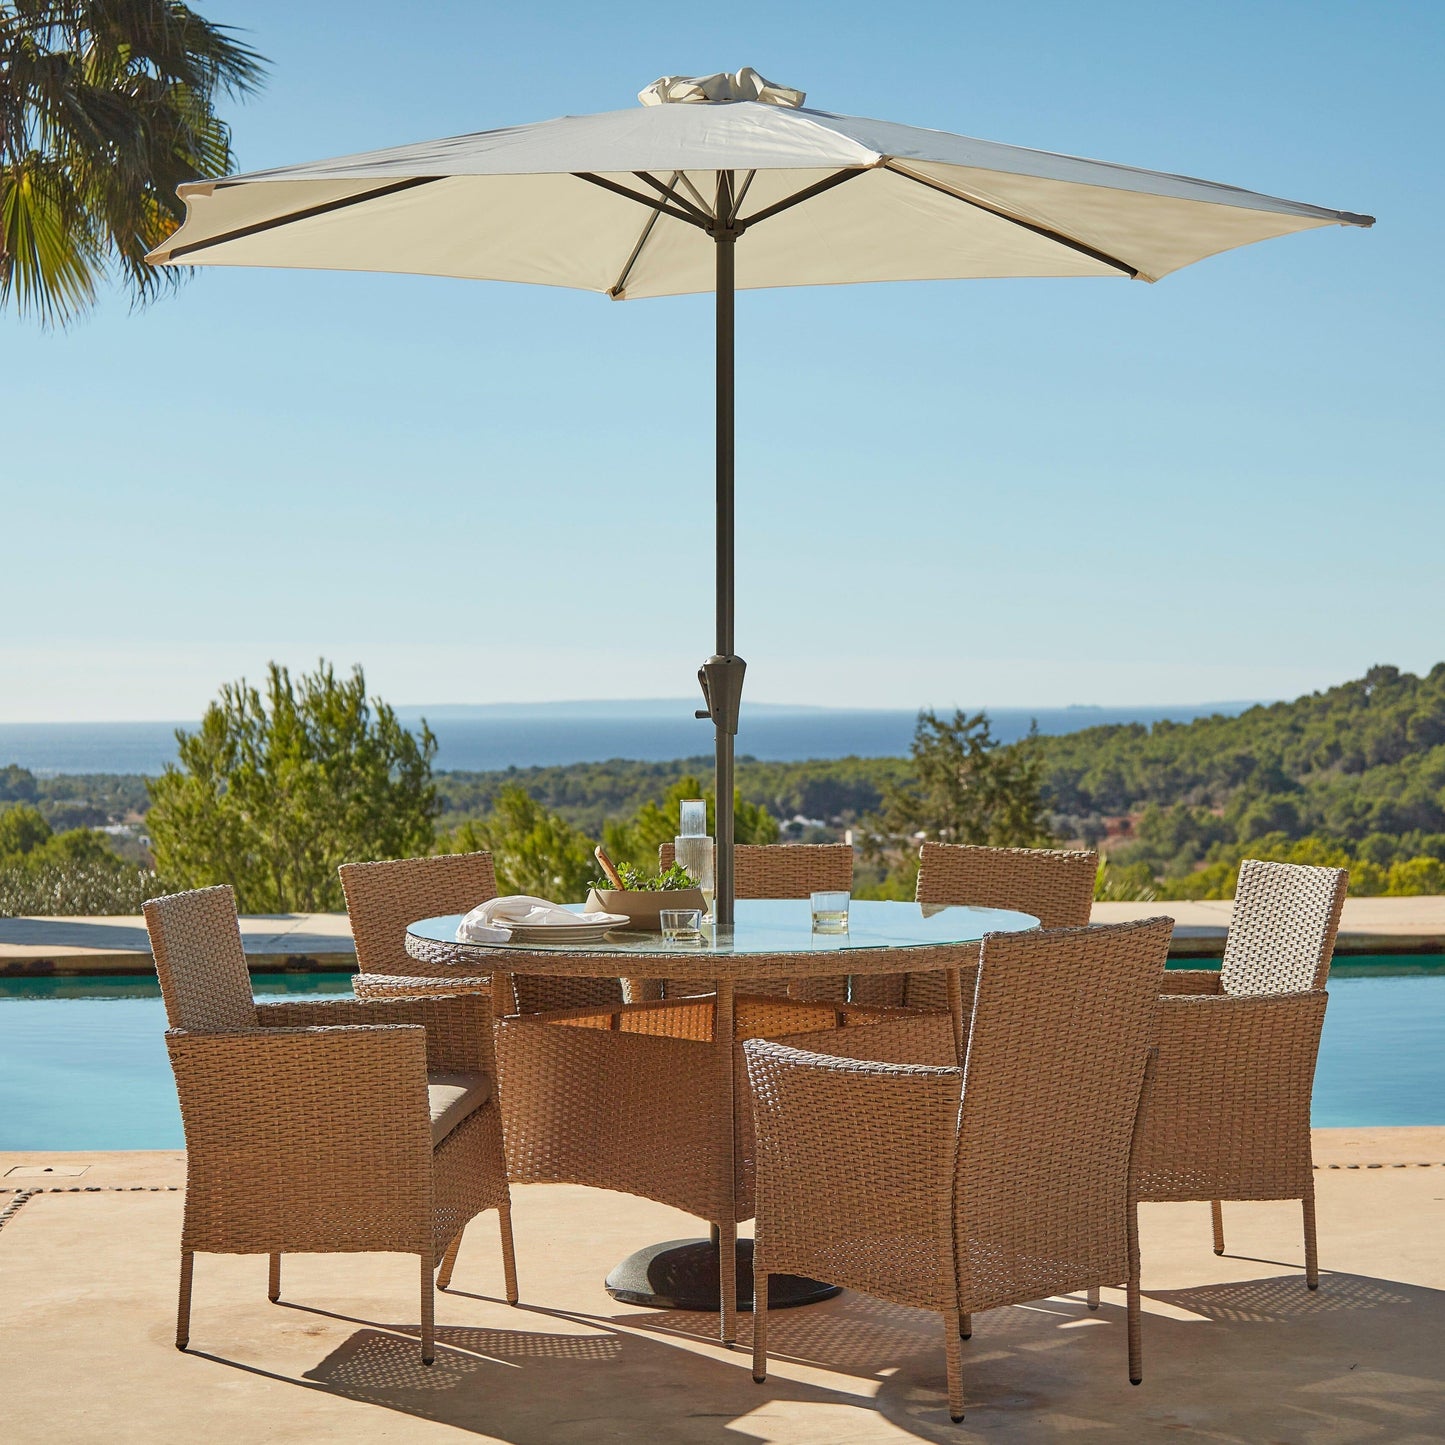 Kemble 6 Seater Rattan Round Dining Set with Cream Parasol - Natural Brown - Laura James